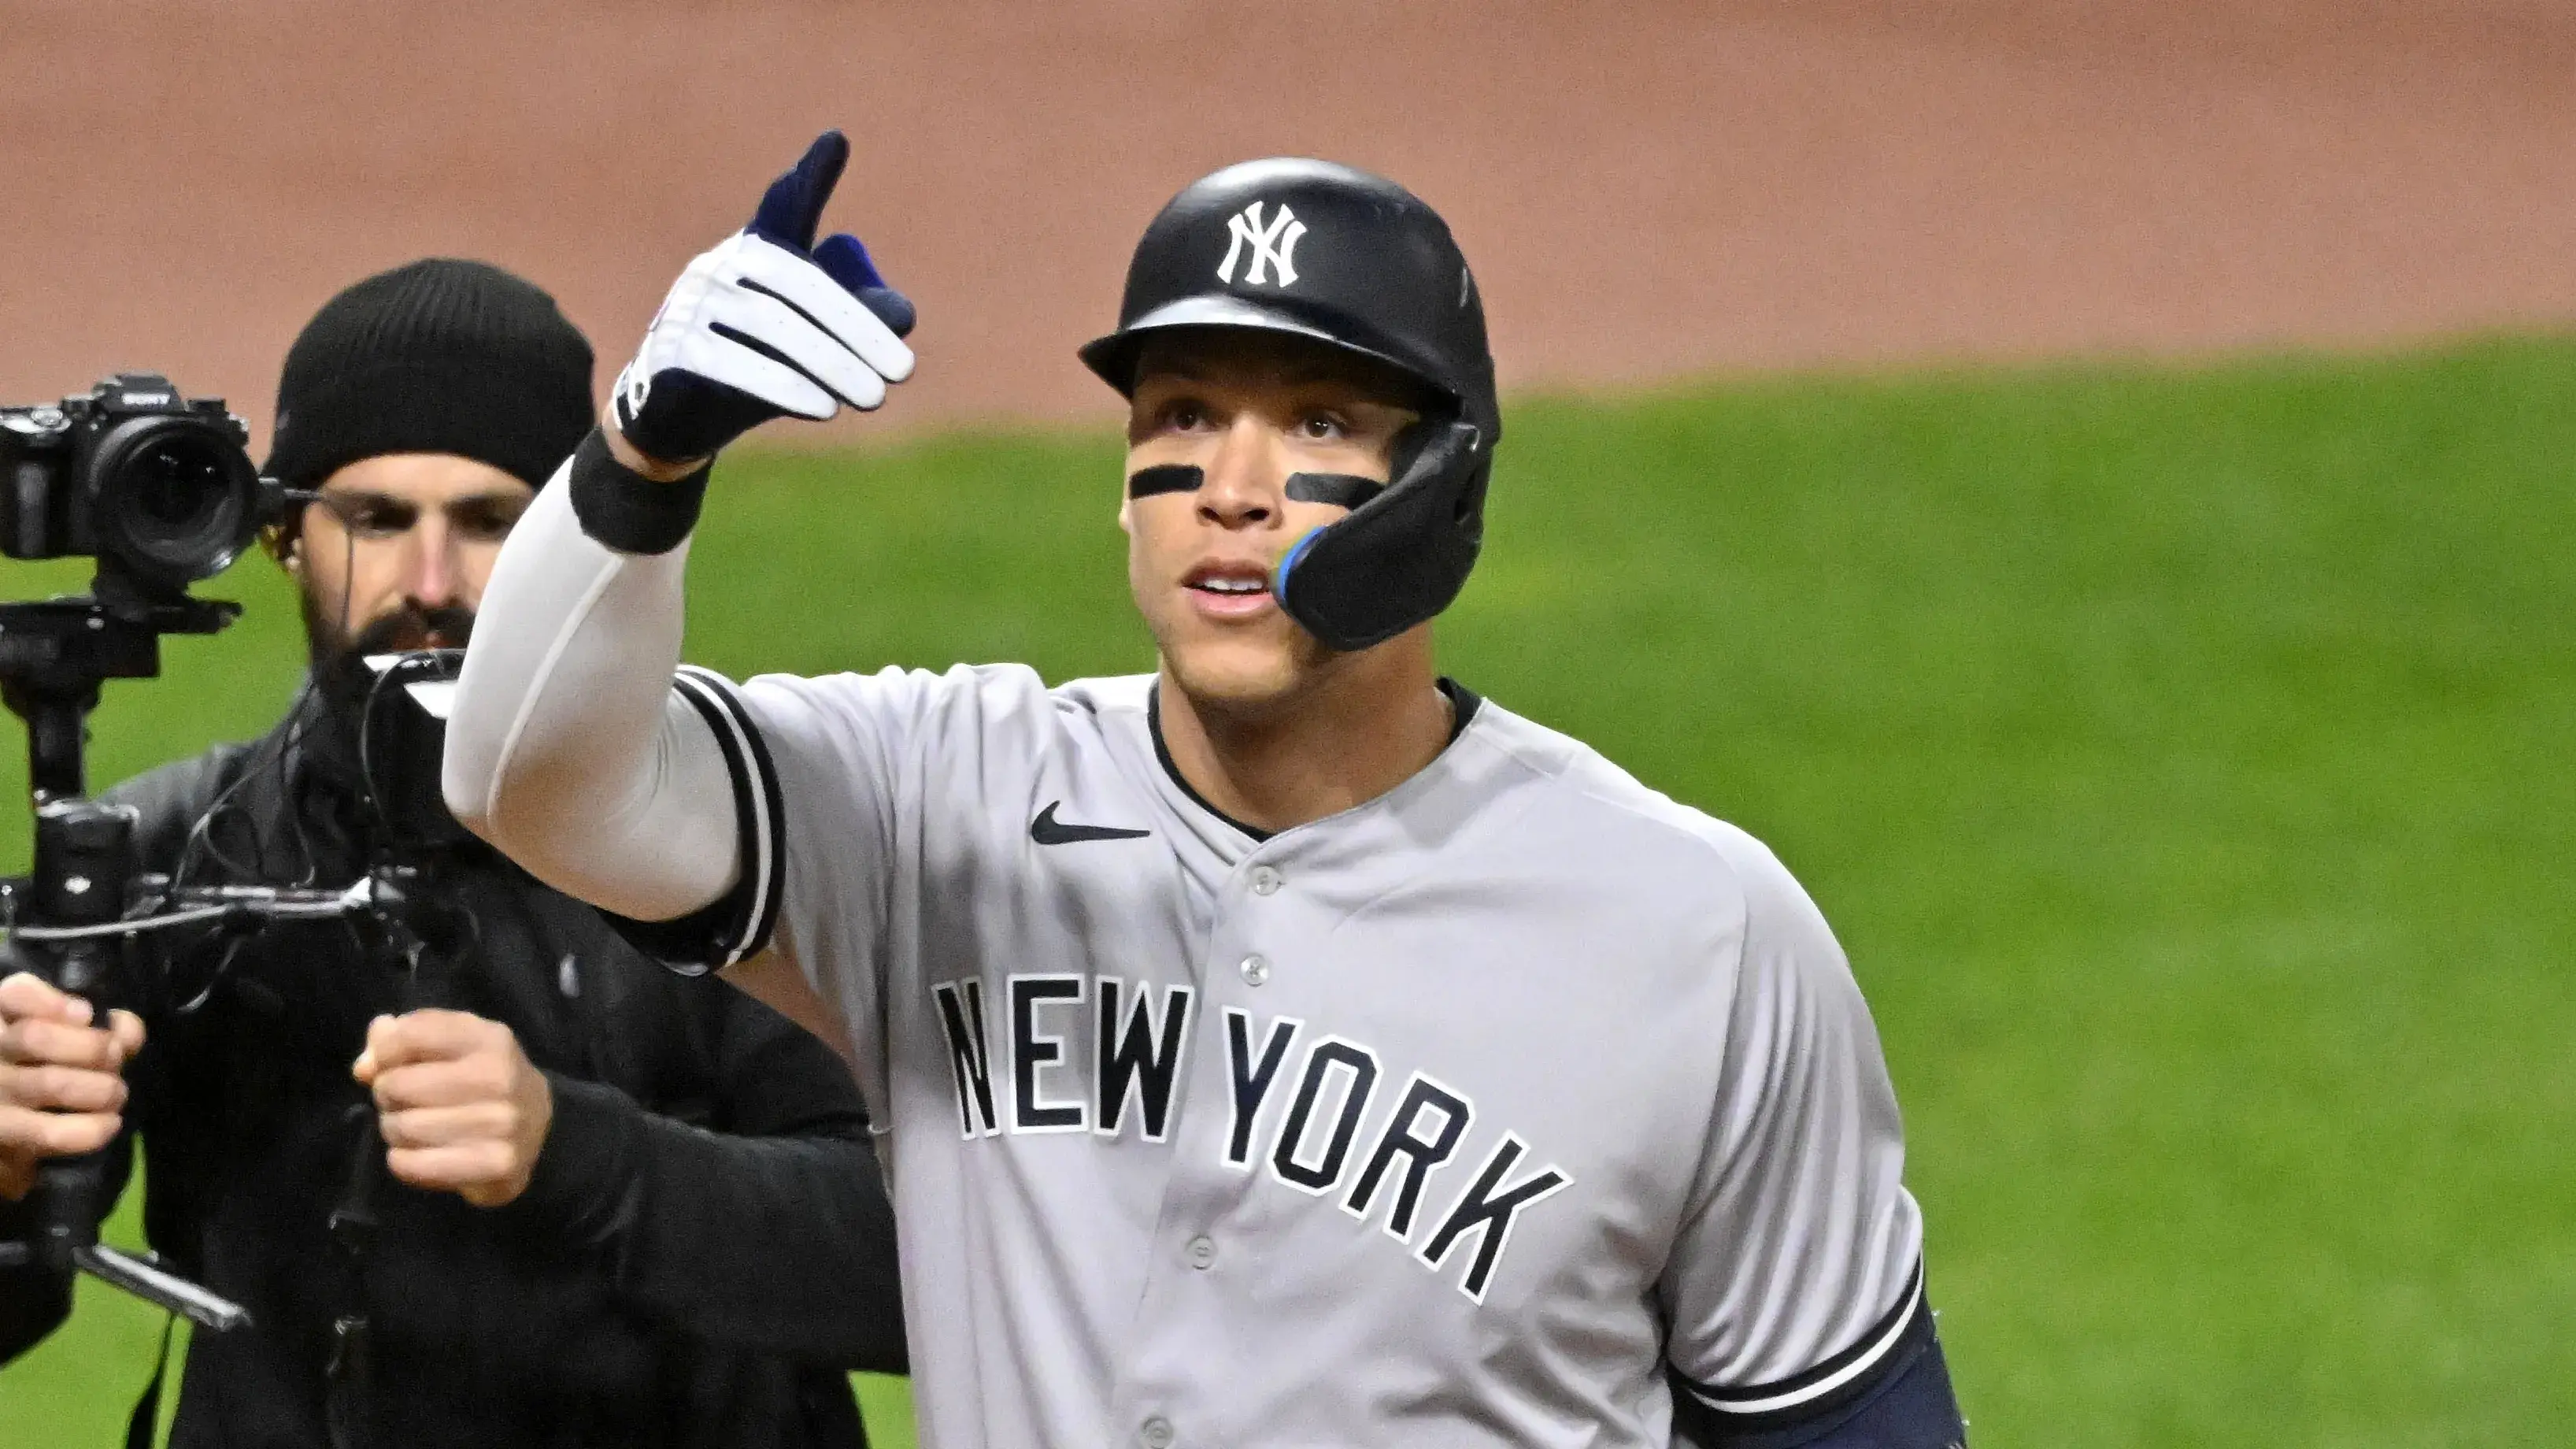 Oct 15, 2022; Cleveland, Ohio, USA; New York Yankees center fielder Aaron Judge (99) reacts after hitting a two run home run against the Cleveland Guardians in the third inning during game three of the NLDS for the 2022 MLB Playoffs at Progressive Field. Mandatory Credit: David Richard-USA TODAY Sports / © David Richard-USA TODAY Sports